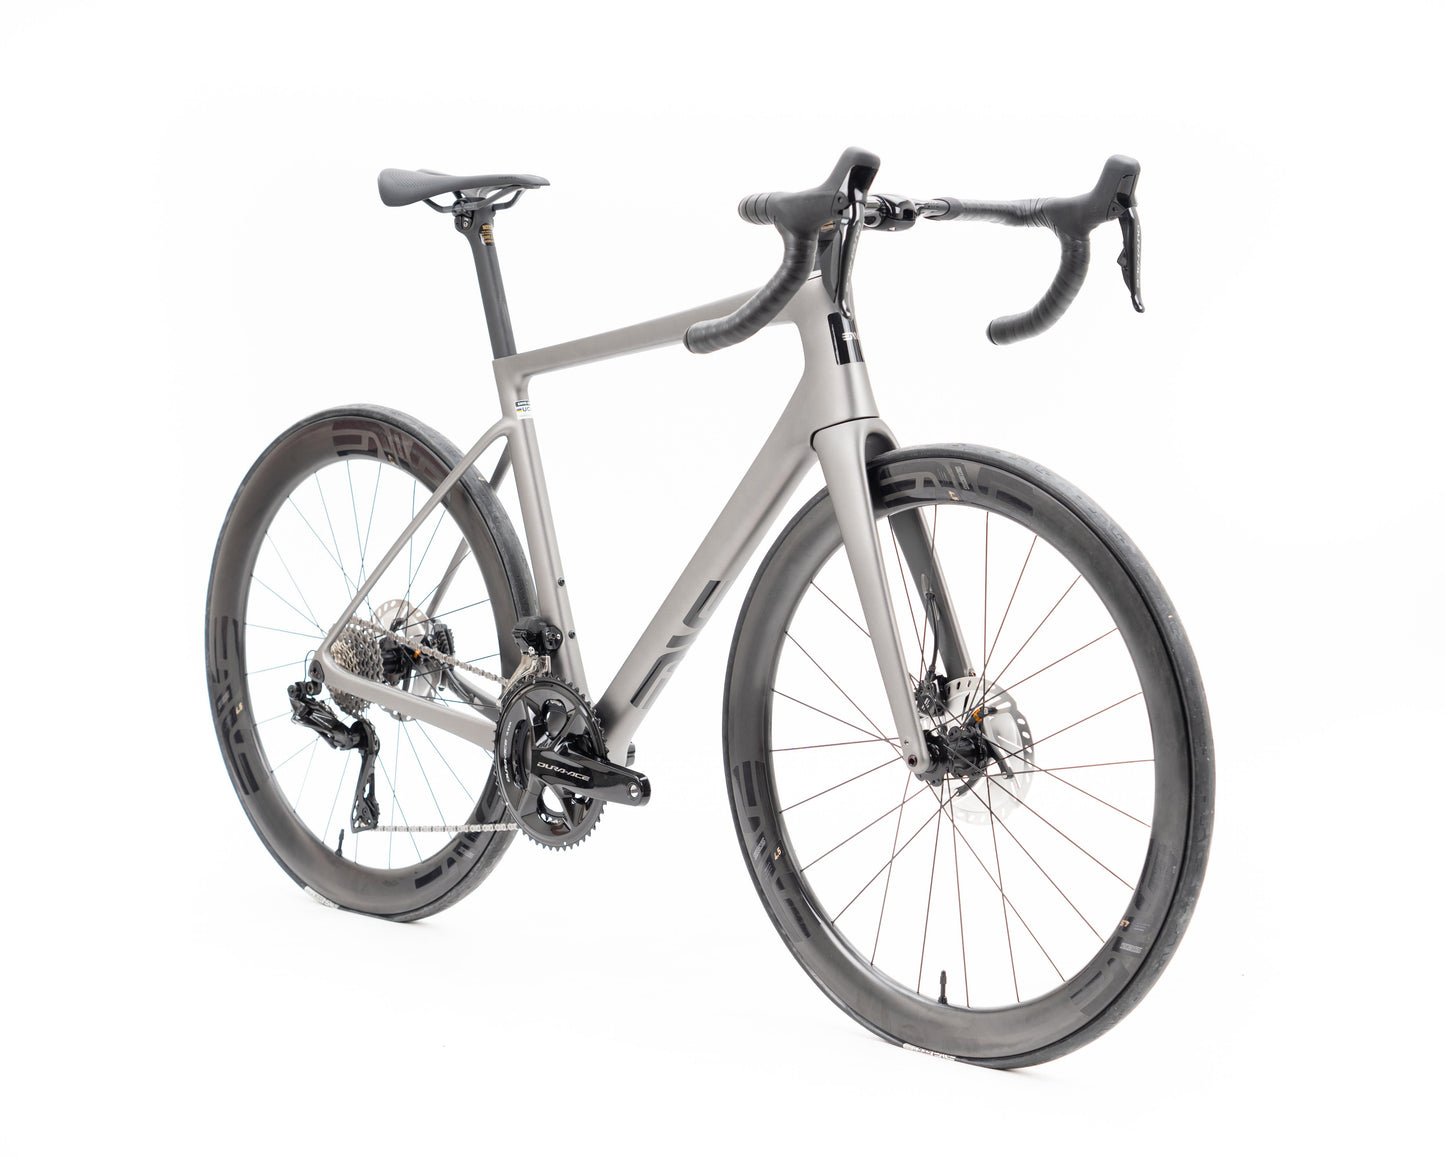 ENVE Melee Pro Build Dura Ace 9200 56cm DamGry